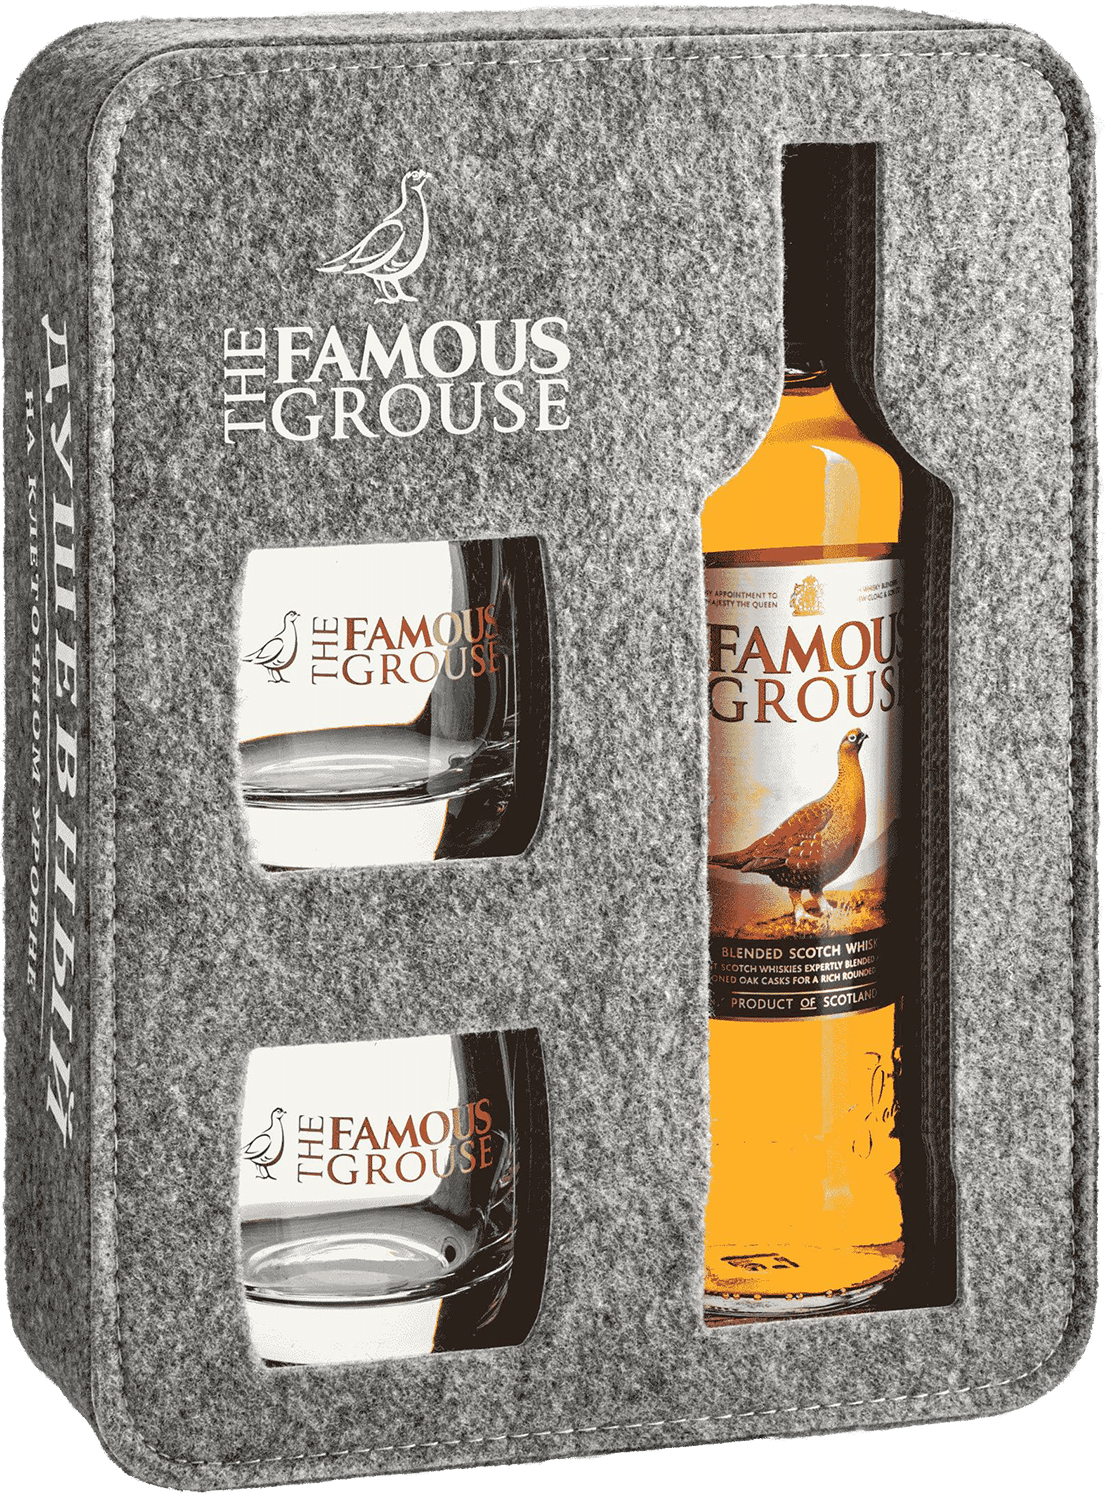 Famous Grouse 3 y.o. Blended Scotch Whisky (gift box with two glasses) jamie stuart blended scotch whisky 3 y o gift box with 2 glasses